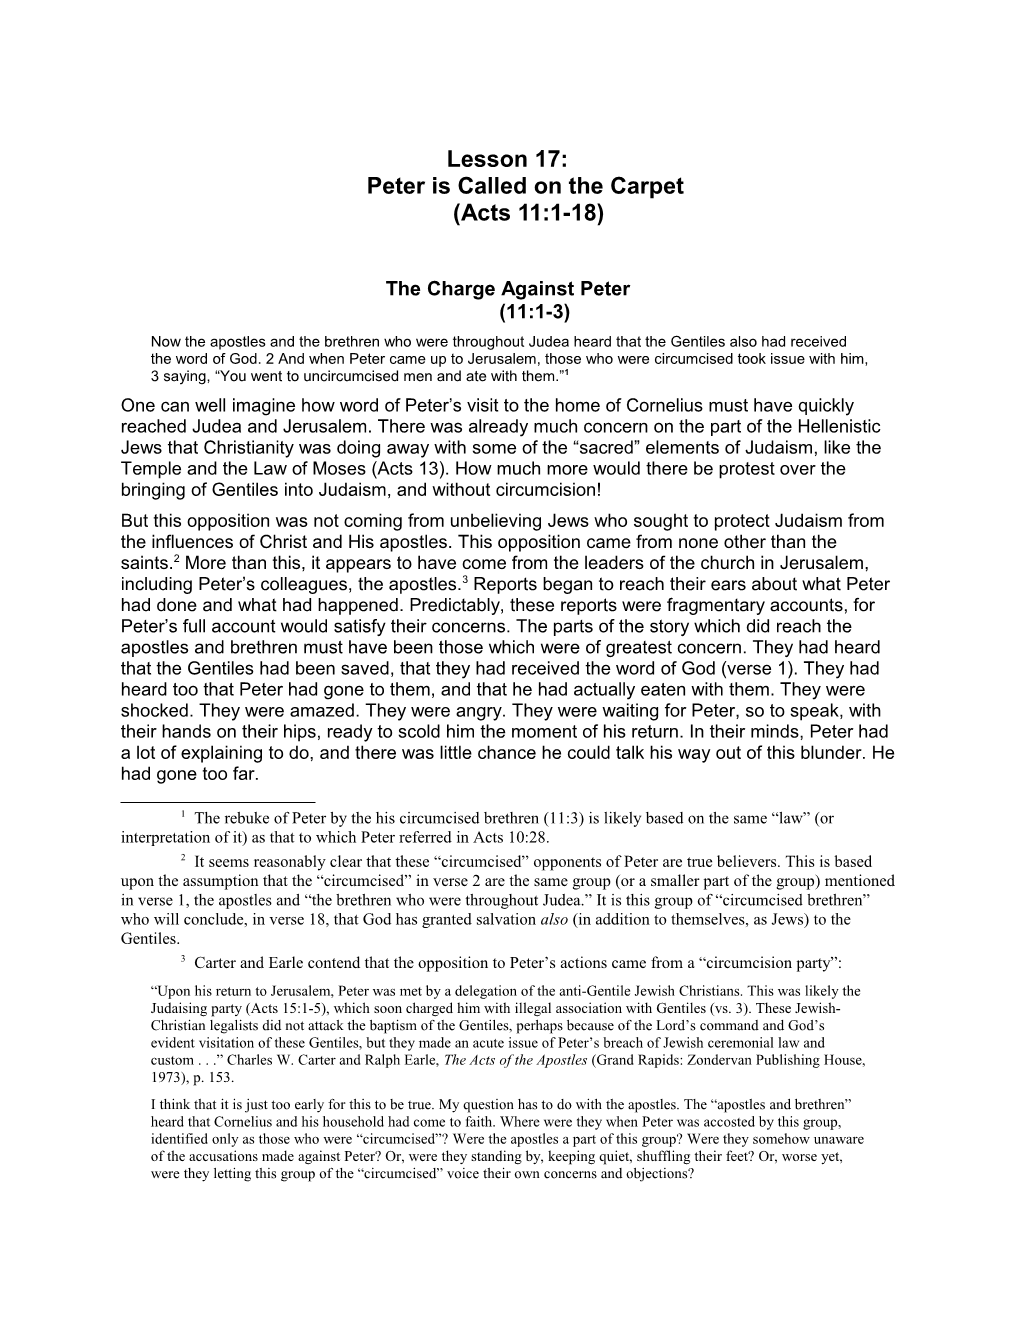 Lesson 17: Peter Is Called on the Carpet